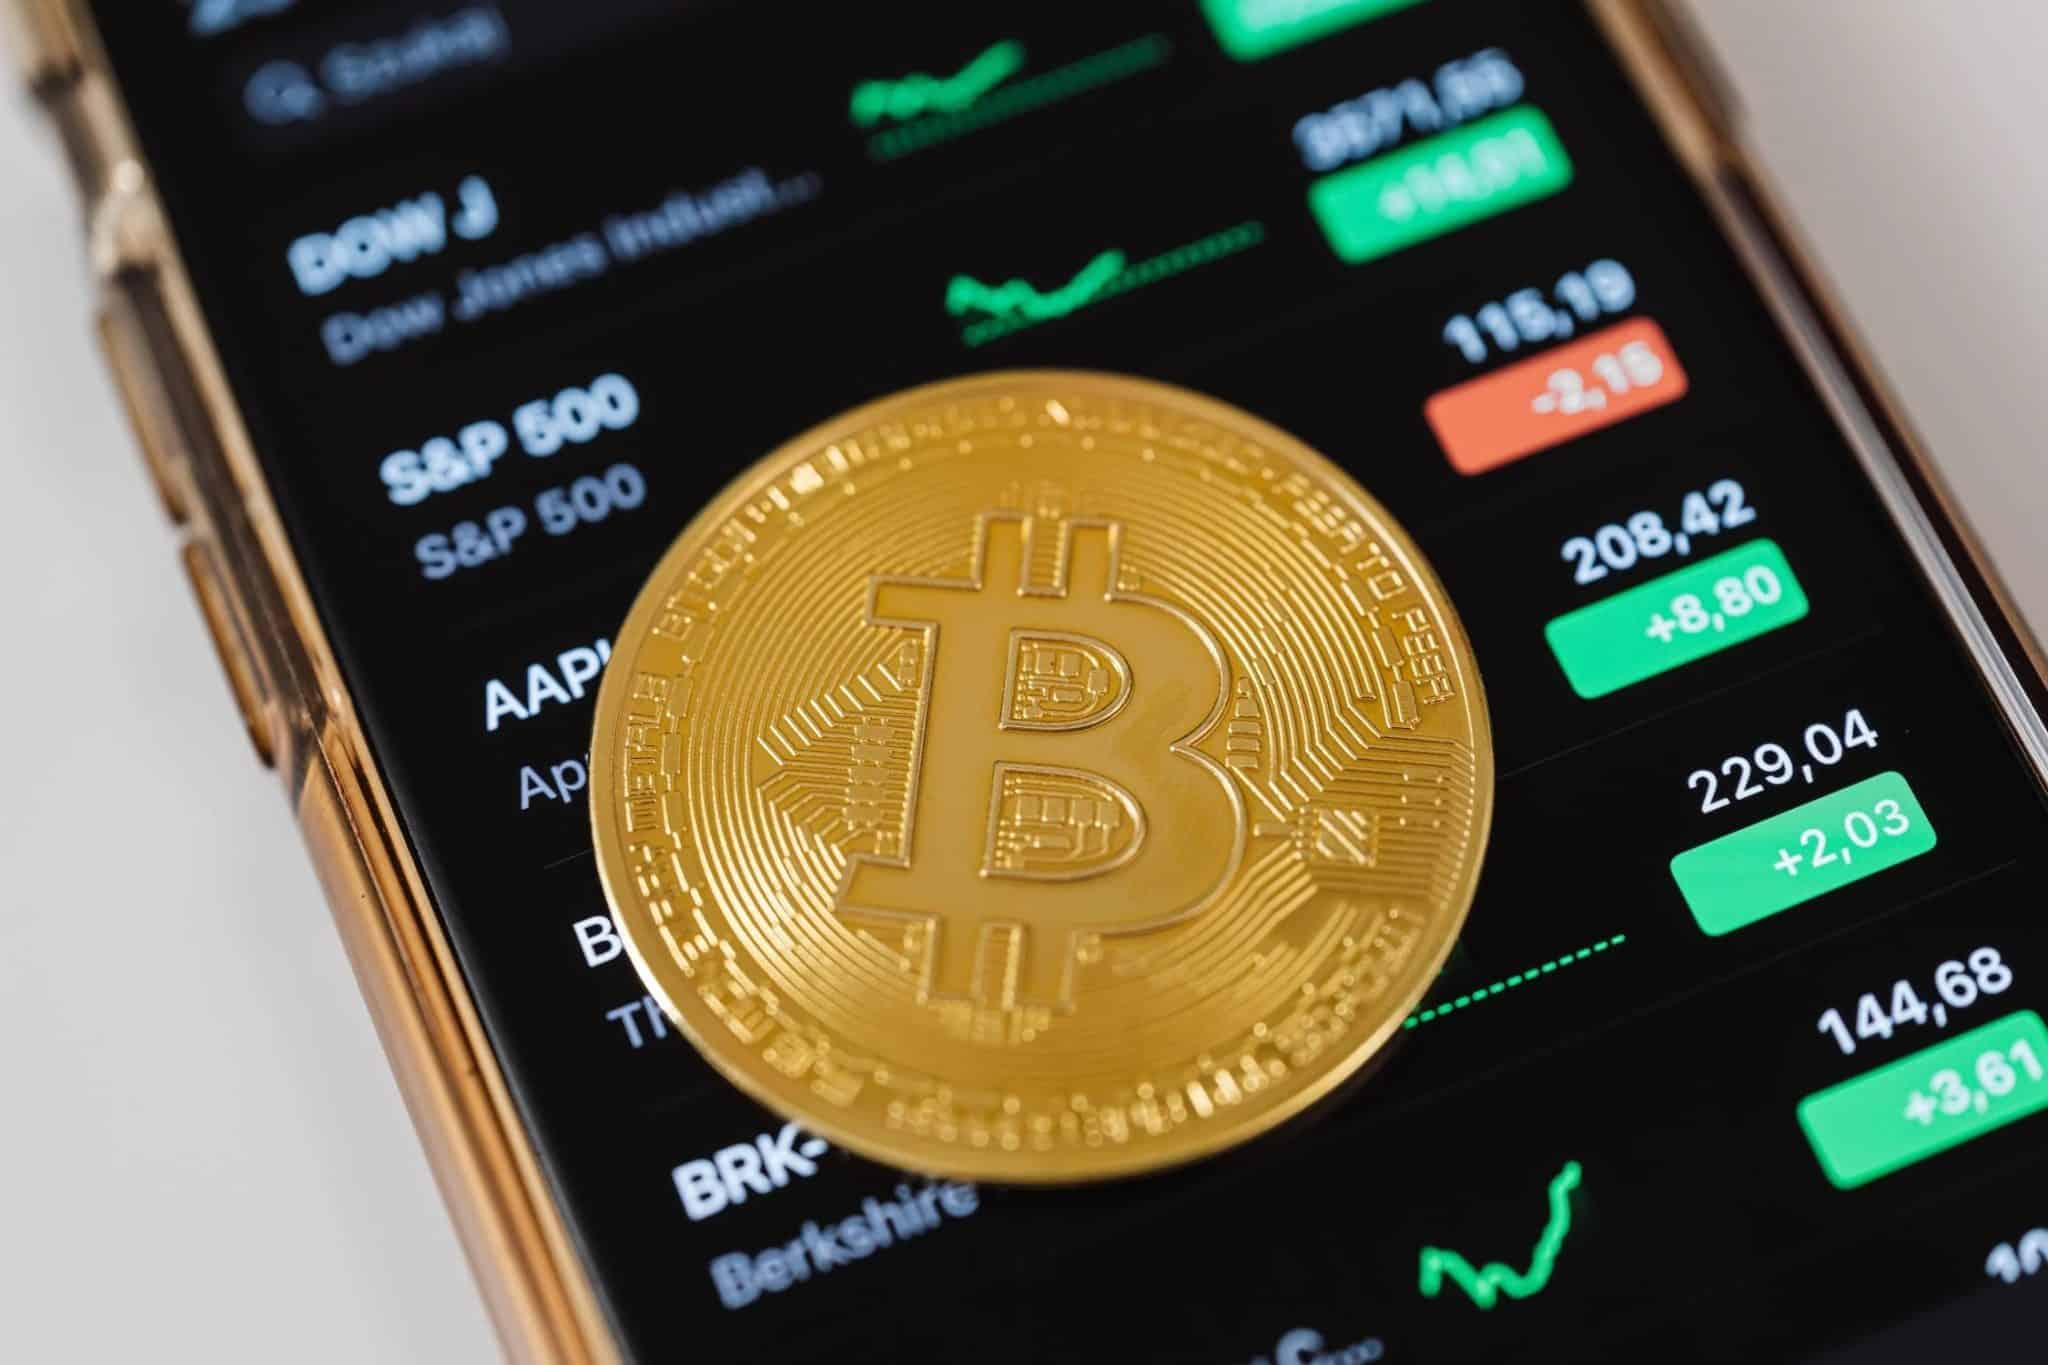 Standard Chartered Shares Bitcoin Price Target – Explains the Reason for BTC’s Recent Decline